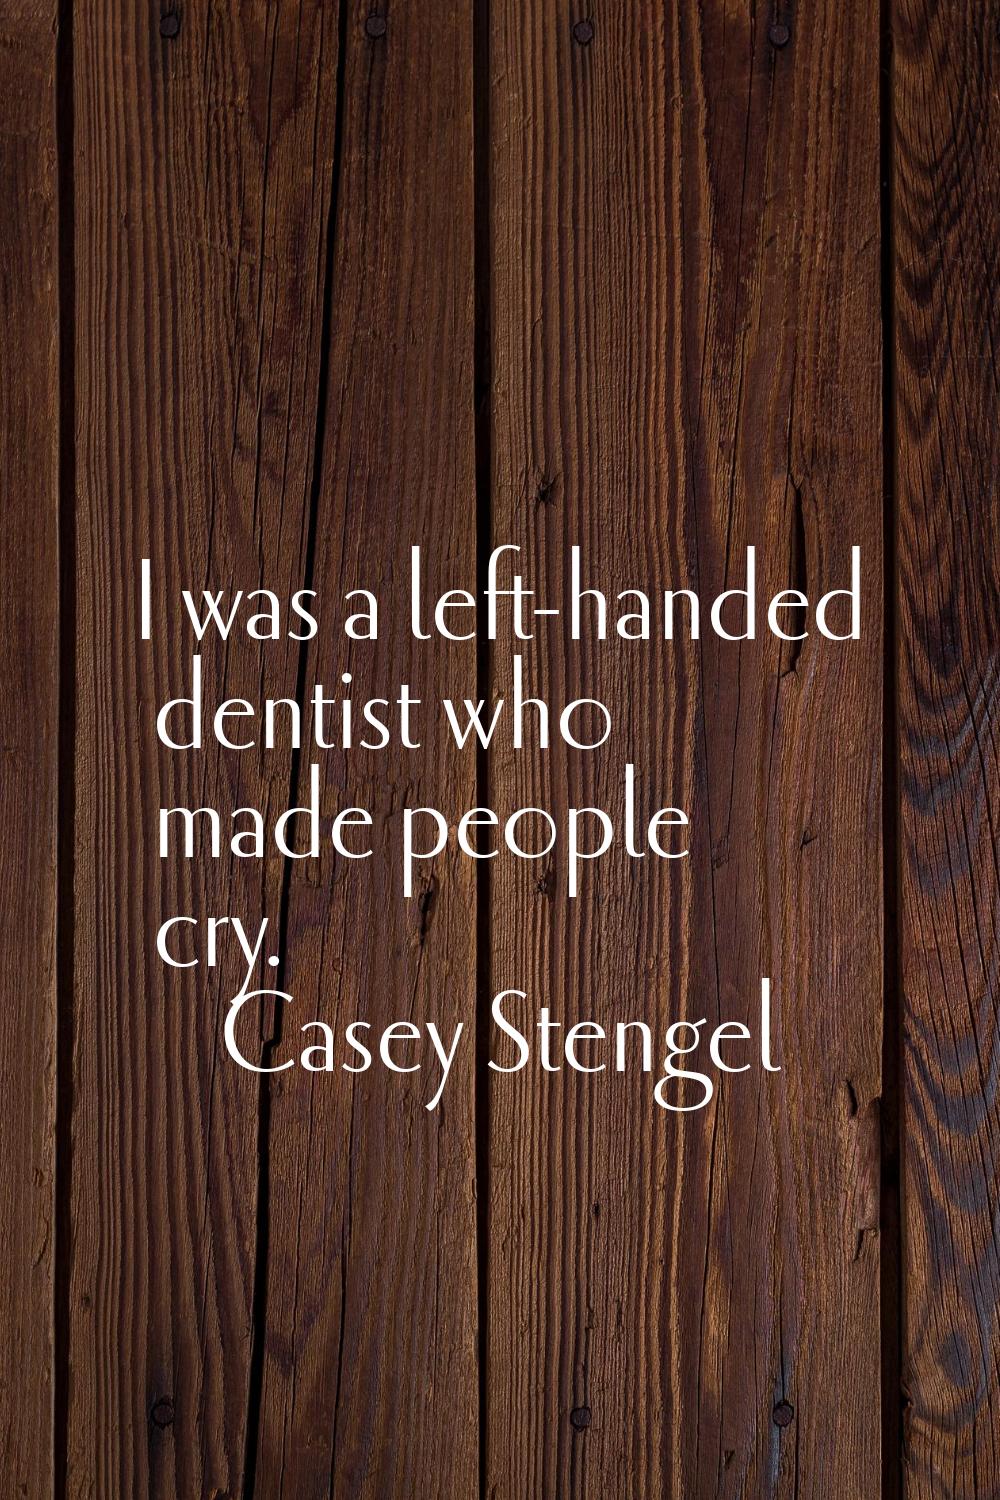 I was a left-handed dentist who made people cry.